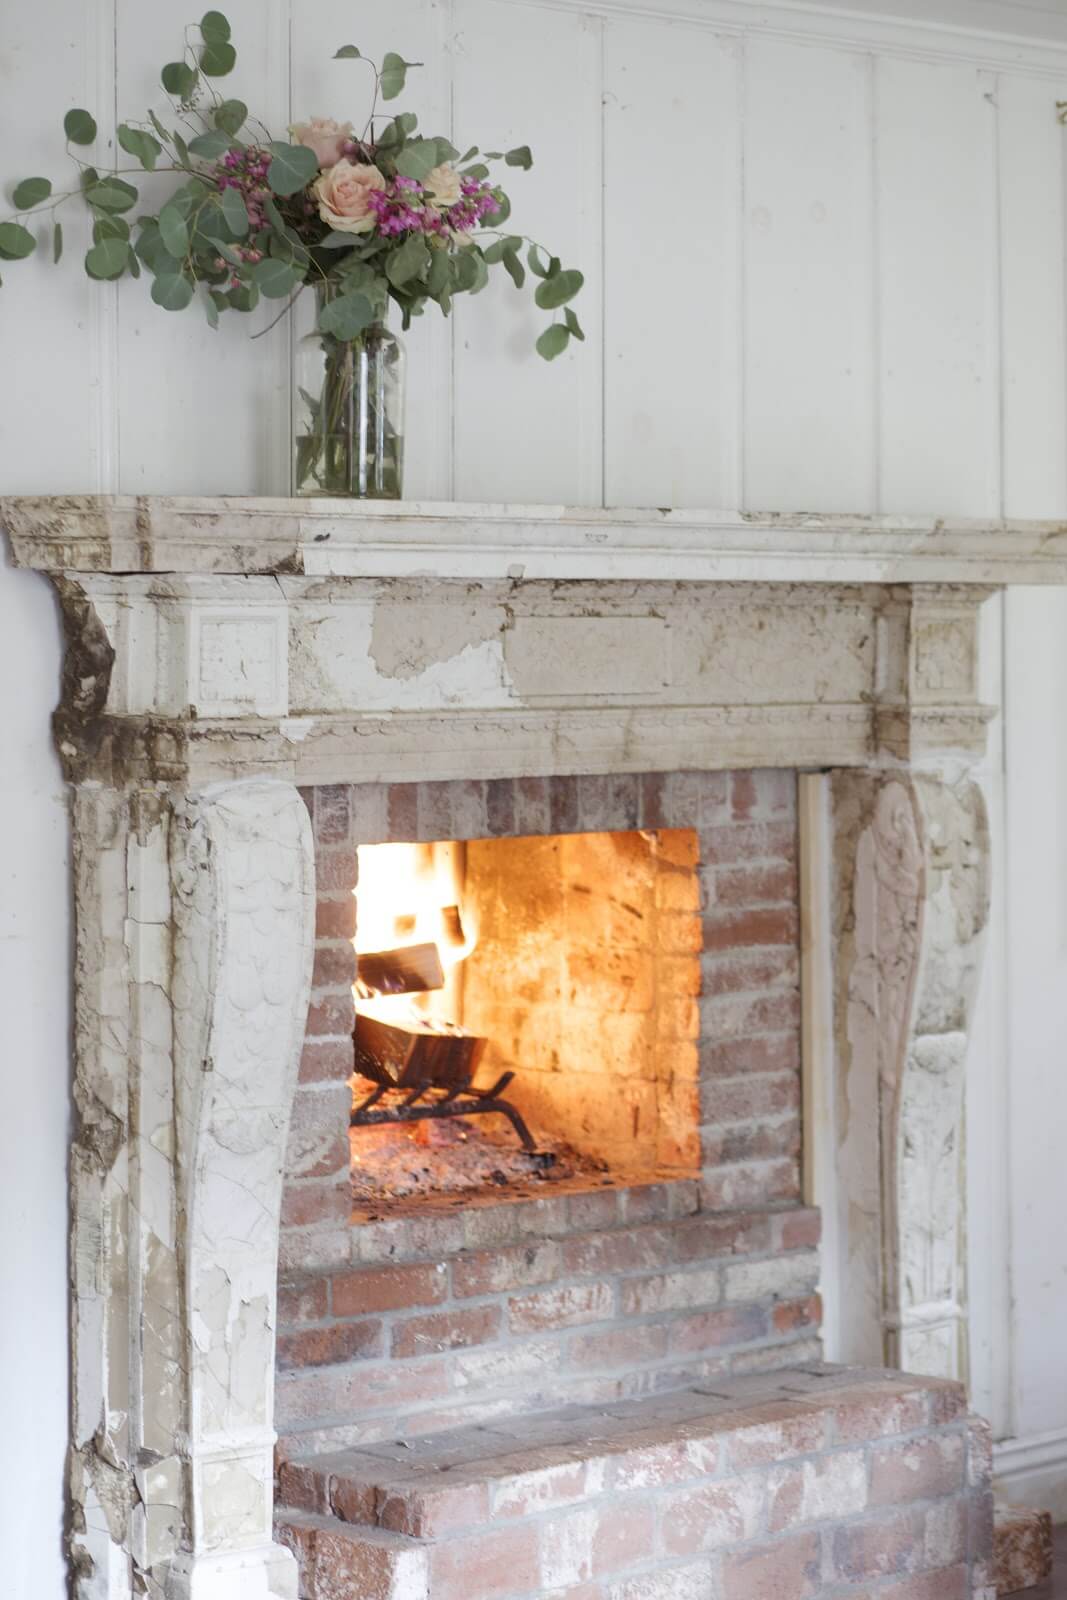 Antique fireplace with flowers